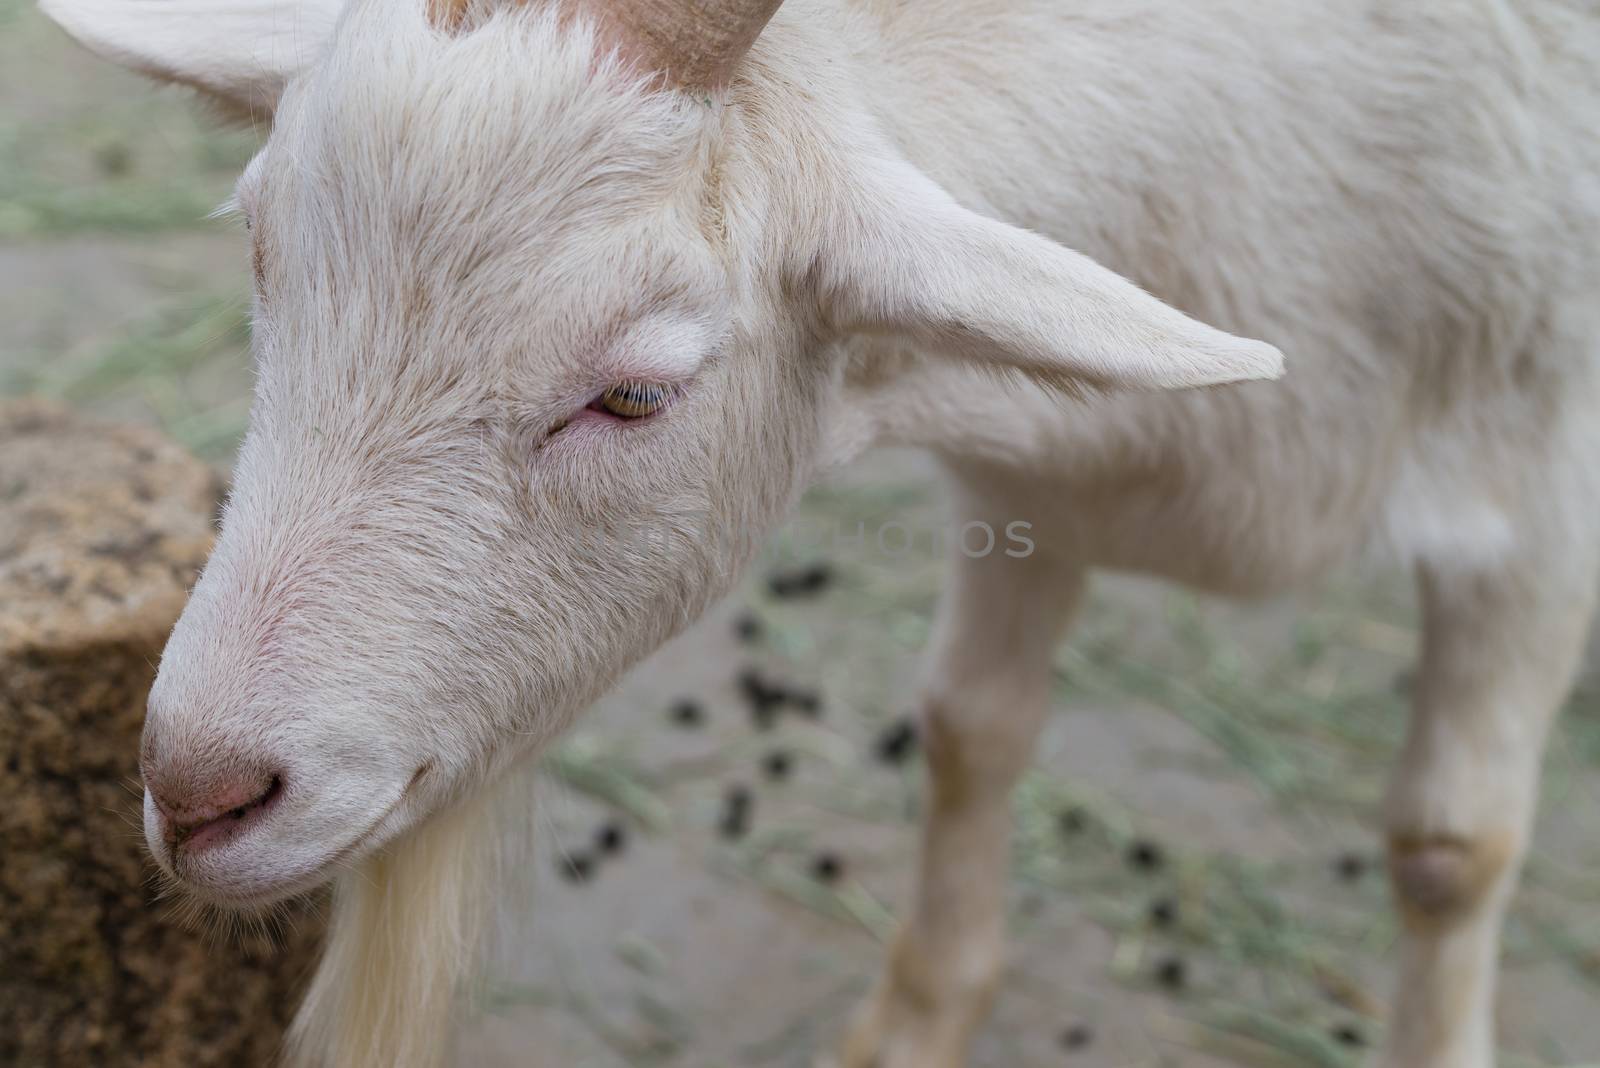 Goat's Face by justtscott